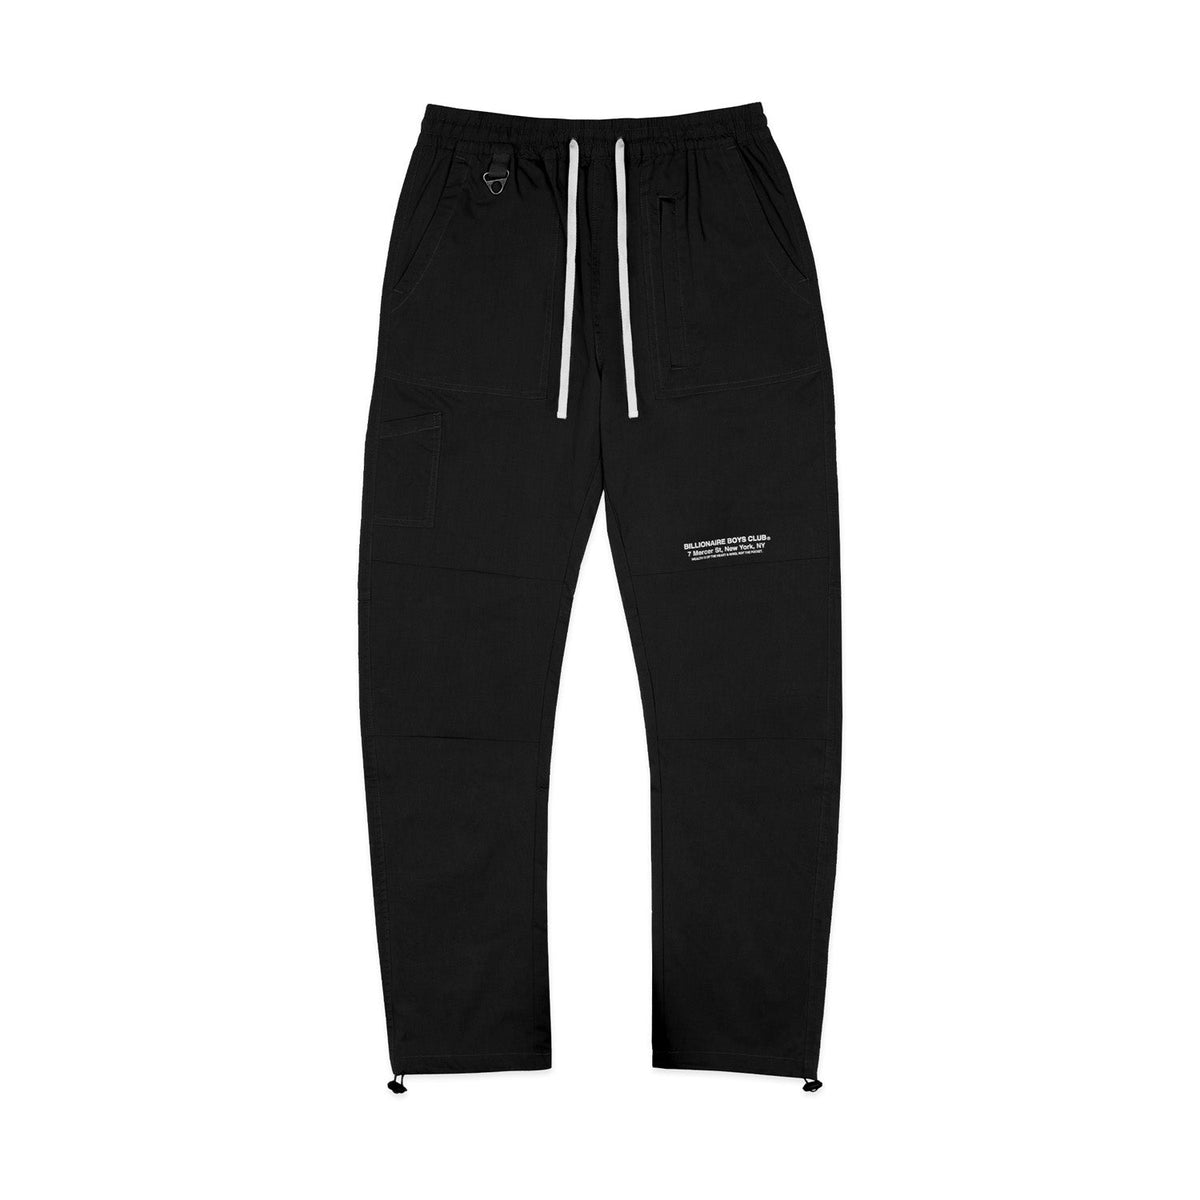 All Brands A-Z BB Craters Pant Black - BOTTOMS - Canada